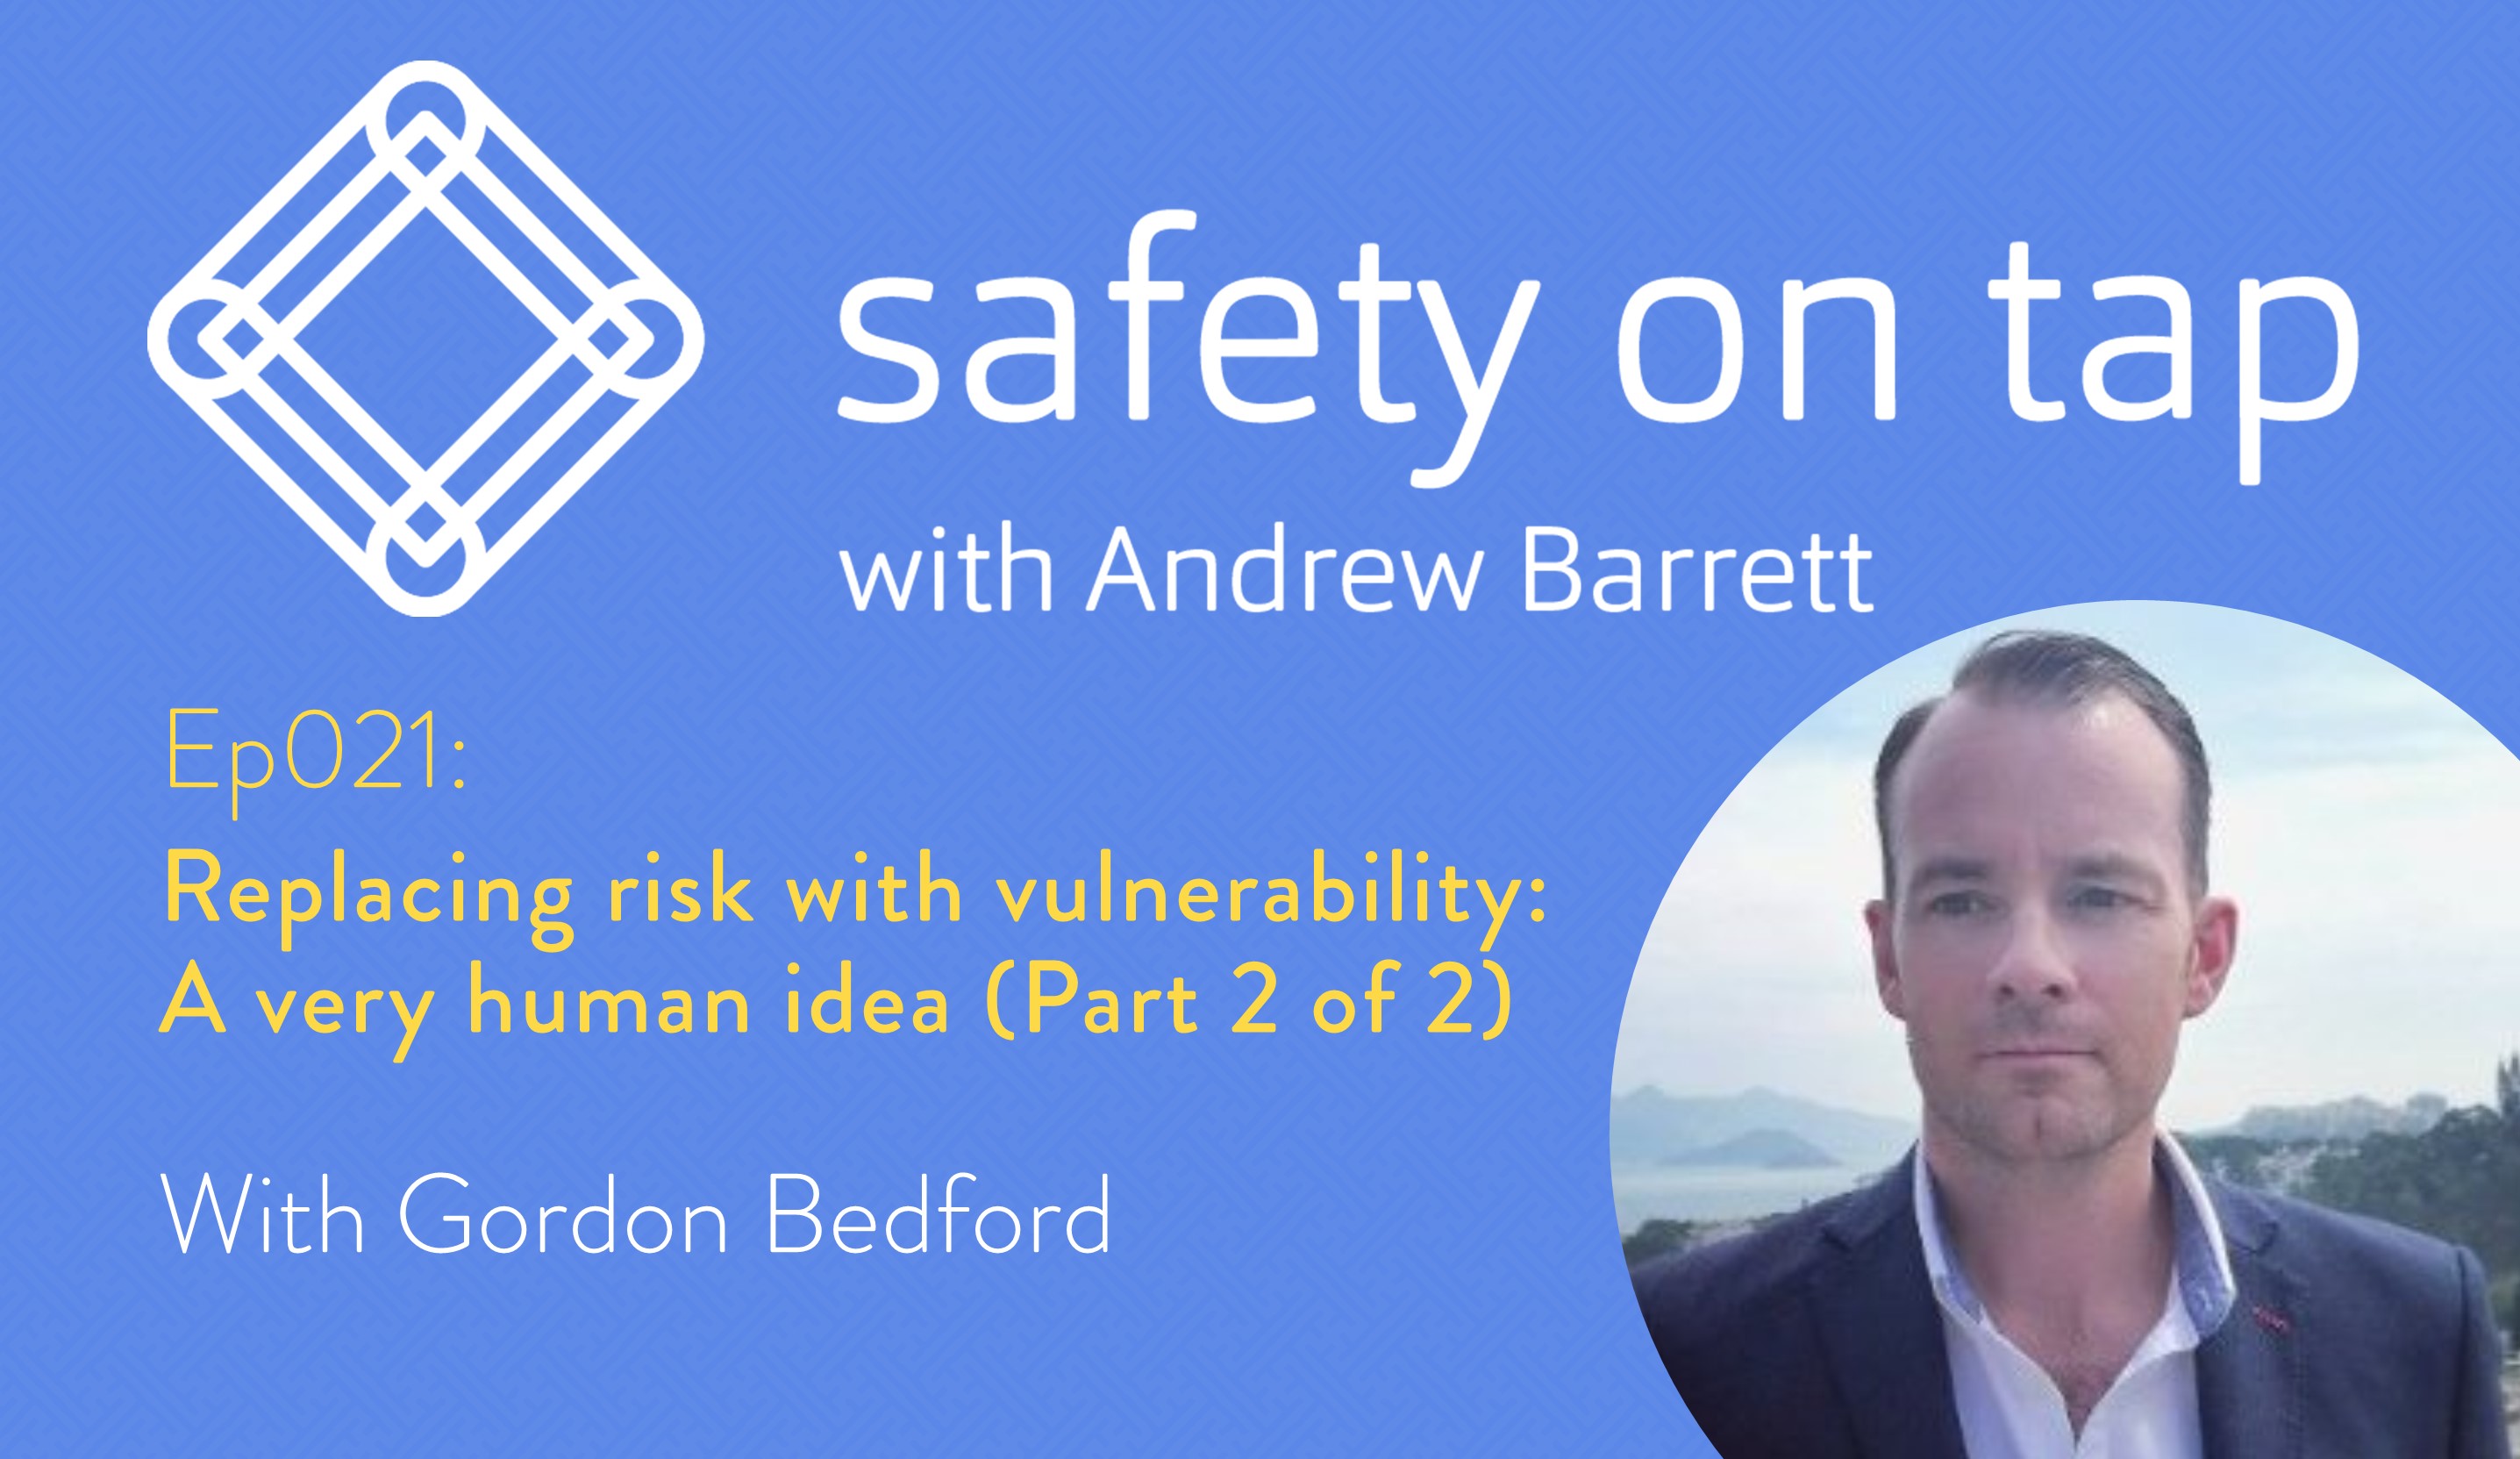 Ep021: Replacing risk with vulnerability: A very human idea, with Gordon Bedford (Part 2 of 2)